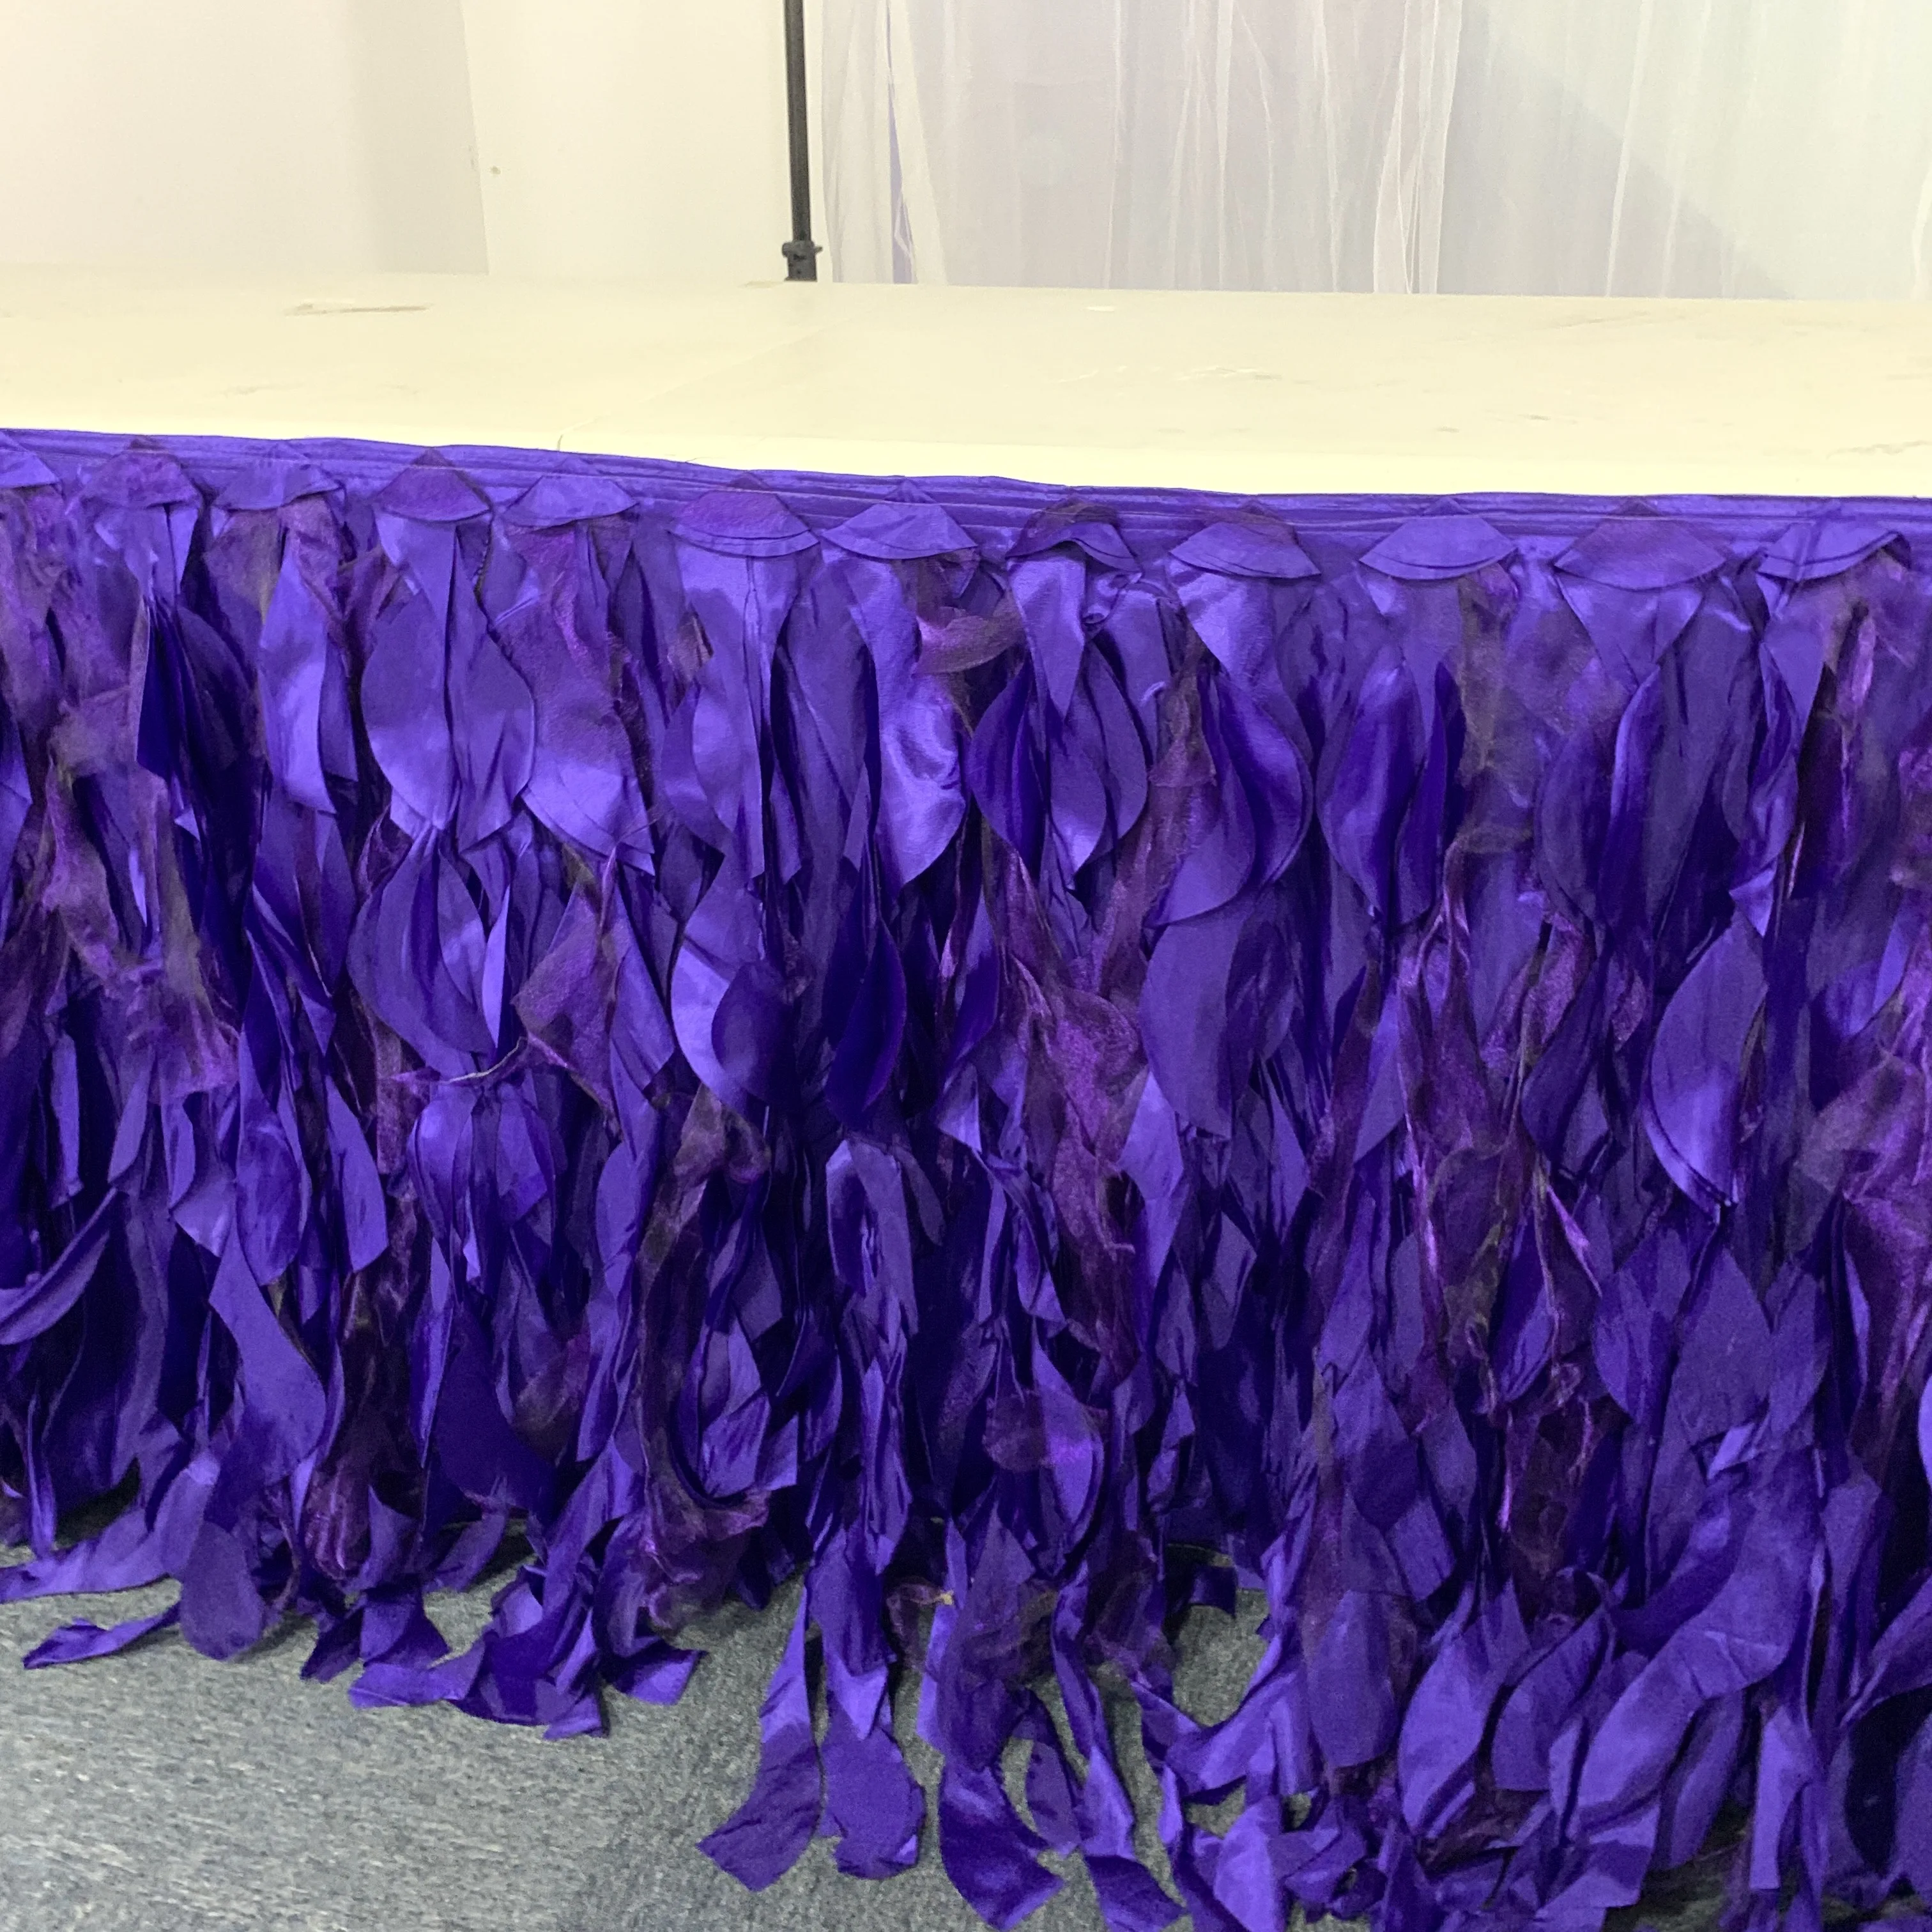 CustomTutu Ruffle Table Skirting Curly Willow Table Skirt for Rectangle or Round Table Tablecloth